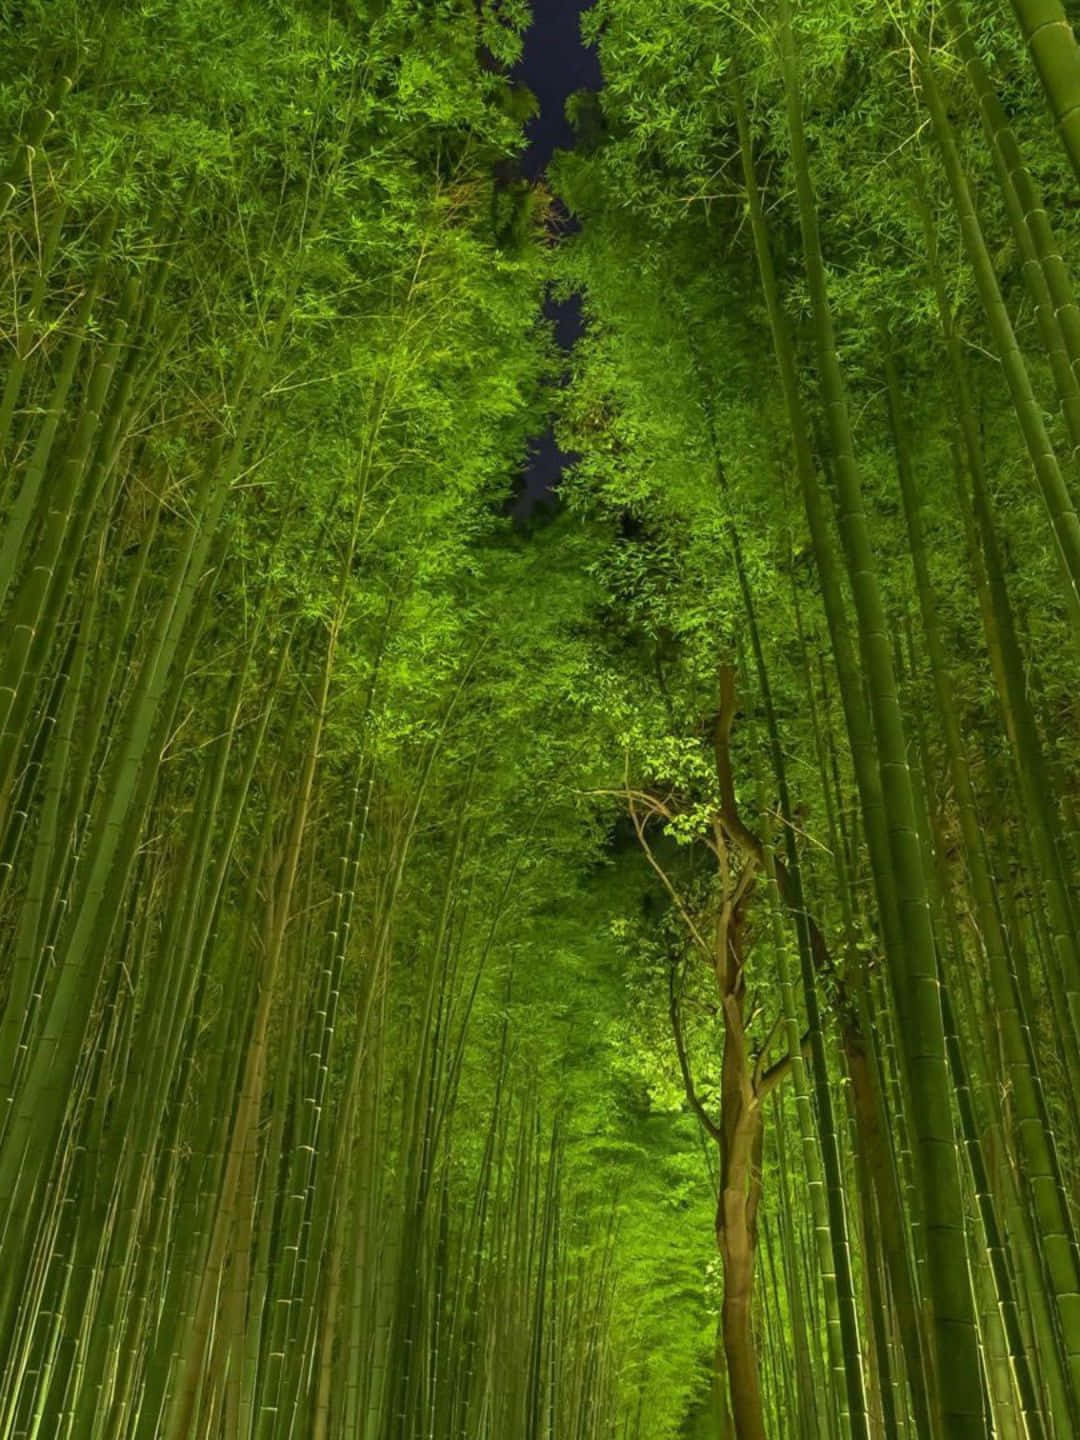 1440p Bamboo Background Shot At Night Time